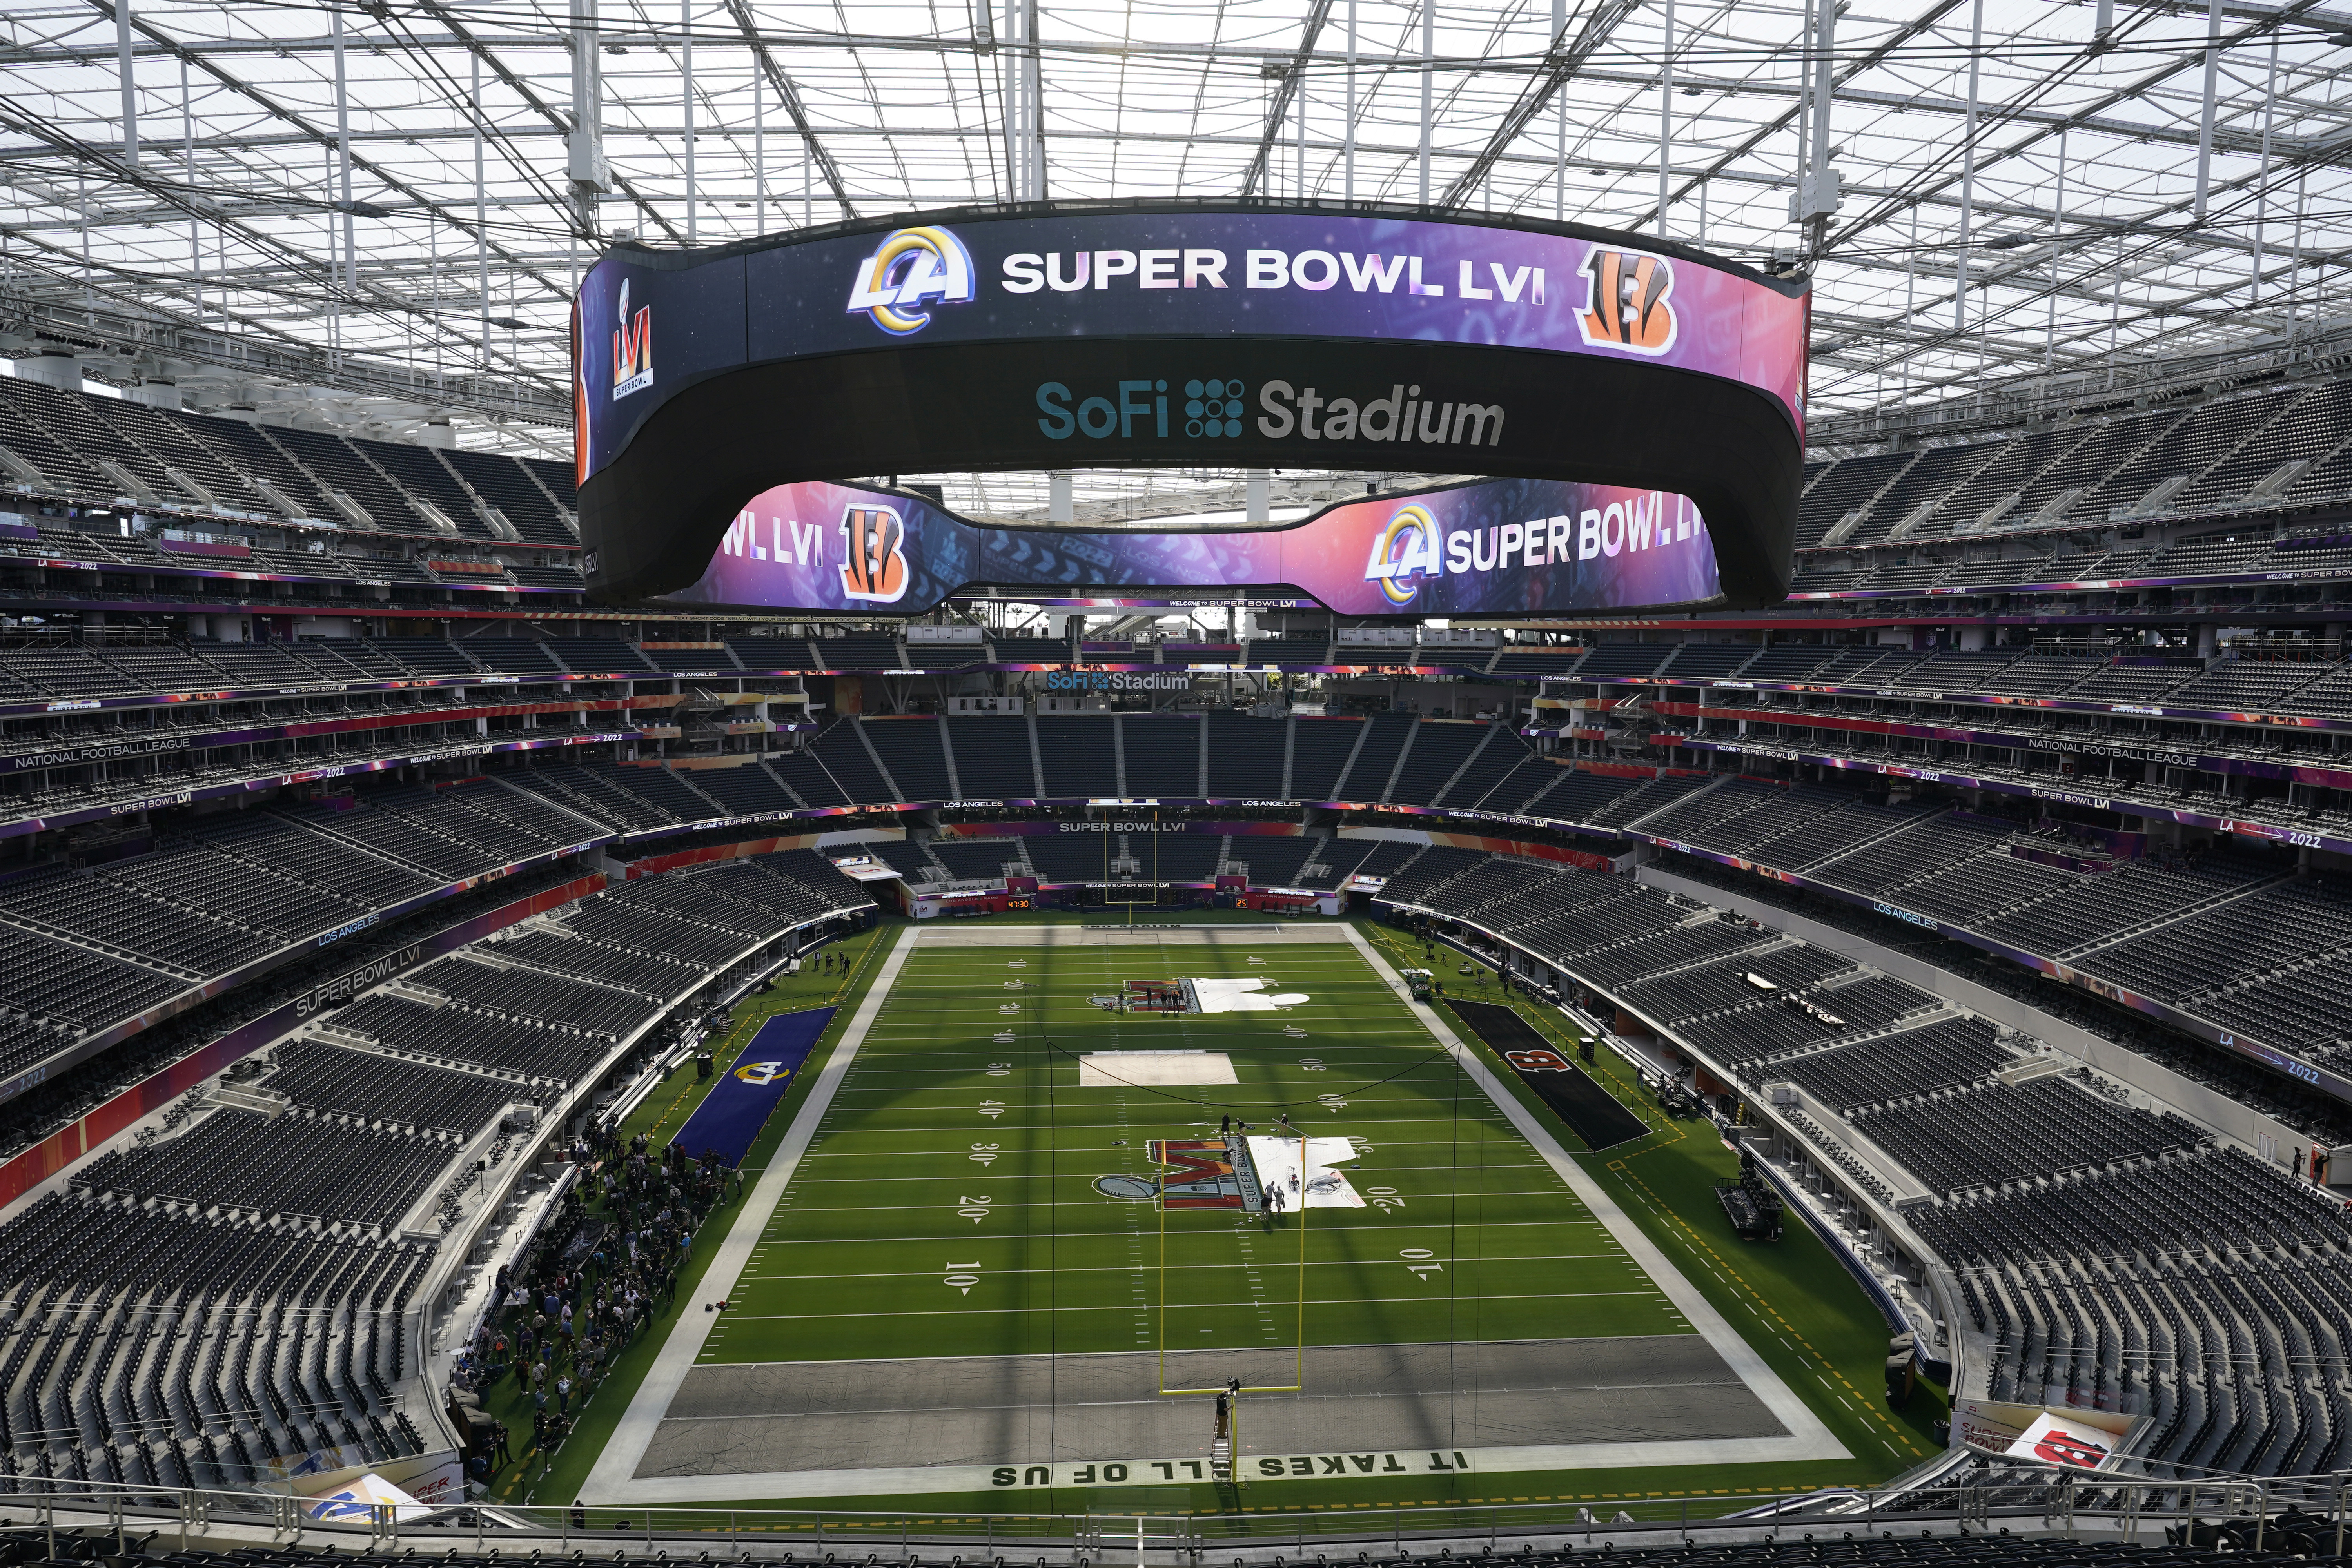 How to watch the Super Bowl and who is performing in the halftime show